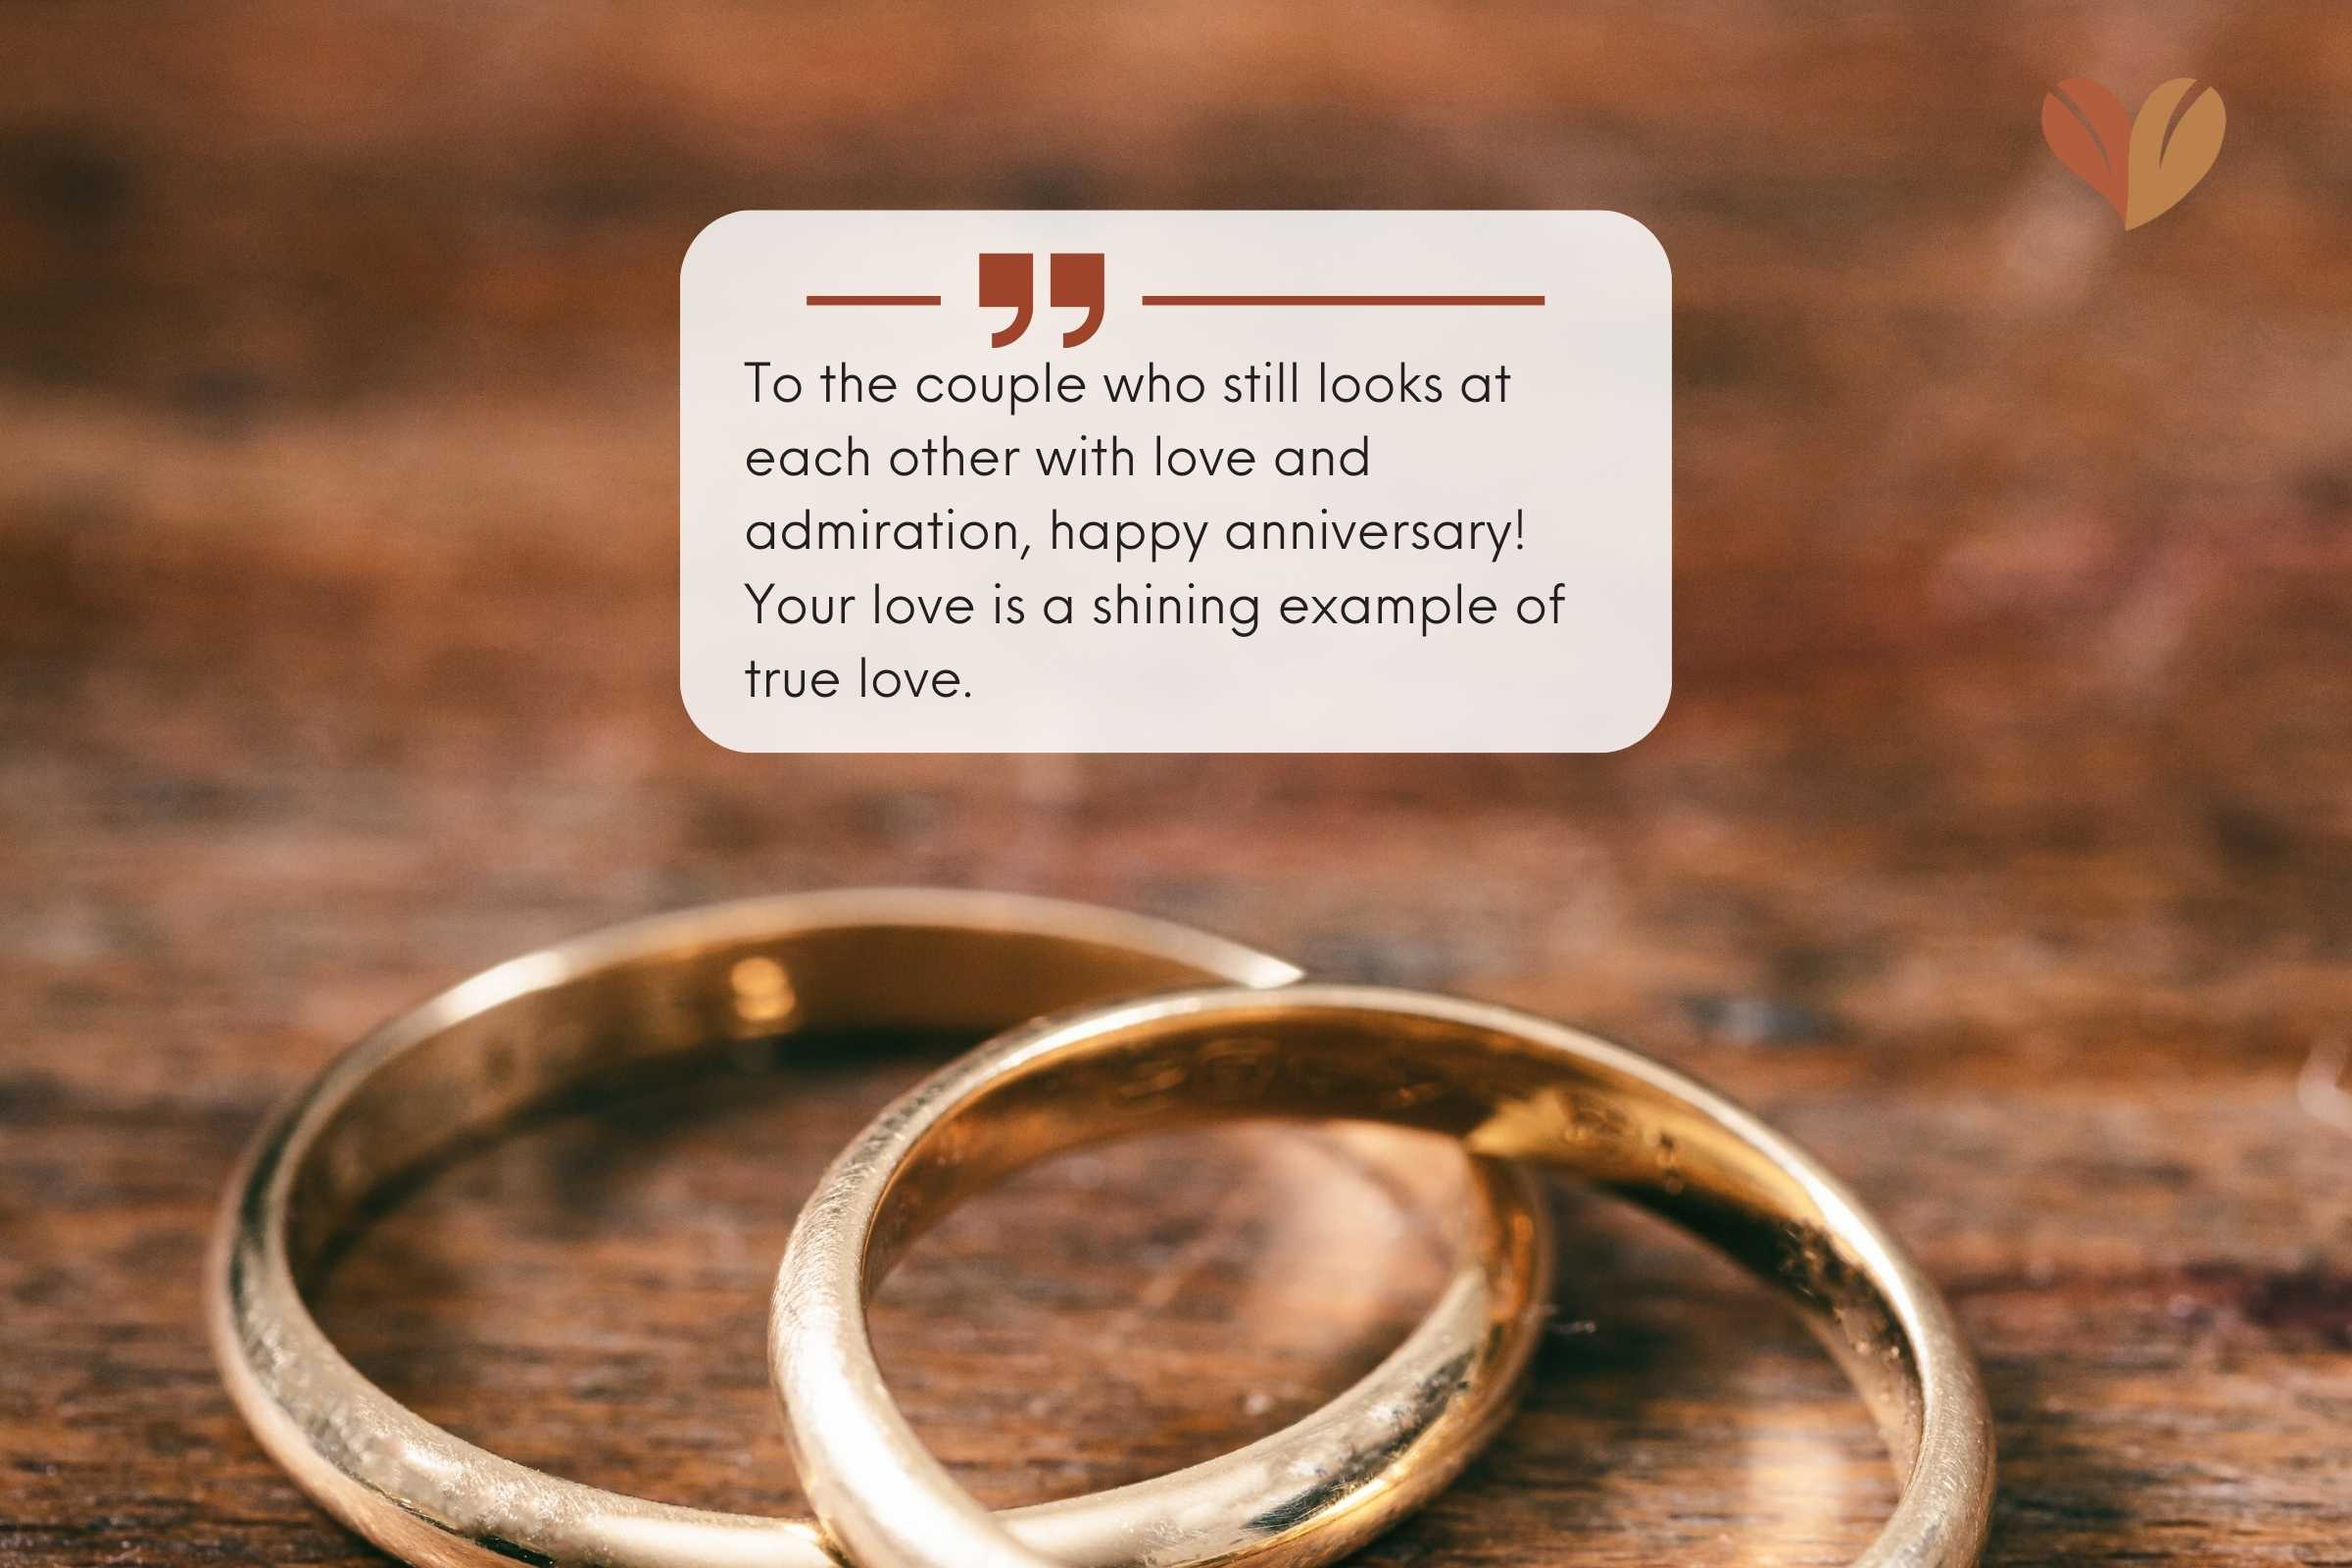 Wishing you many more years of happiness together - Anniversary wishes for parents